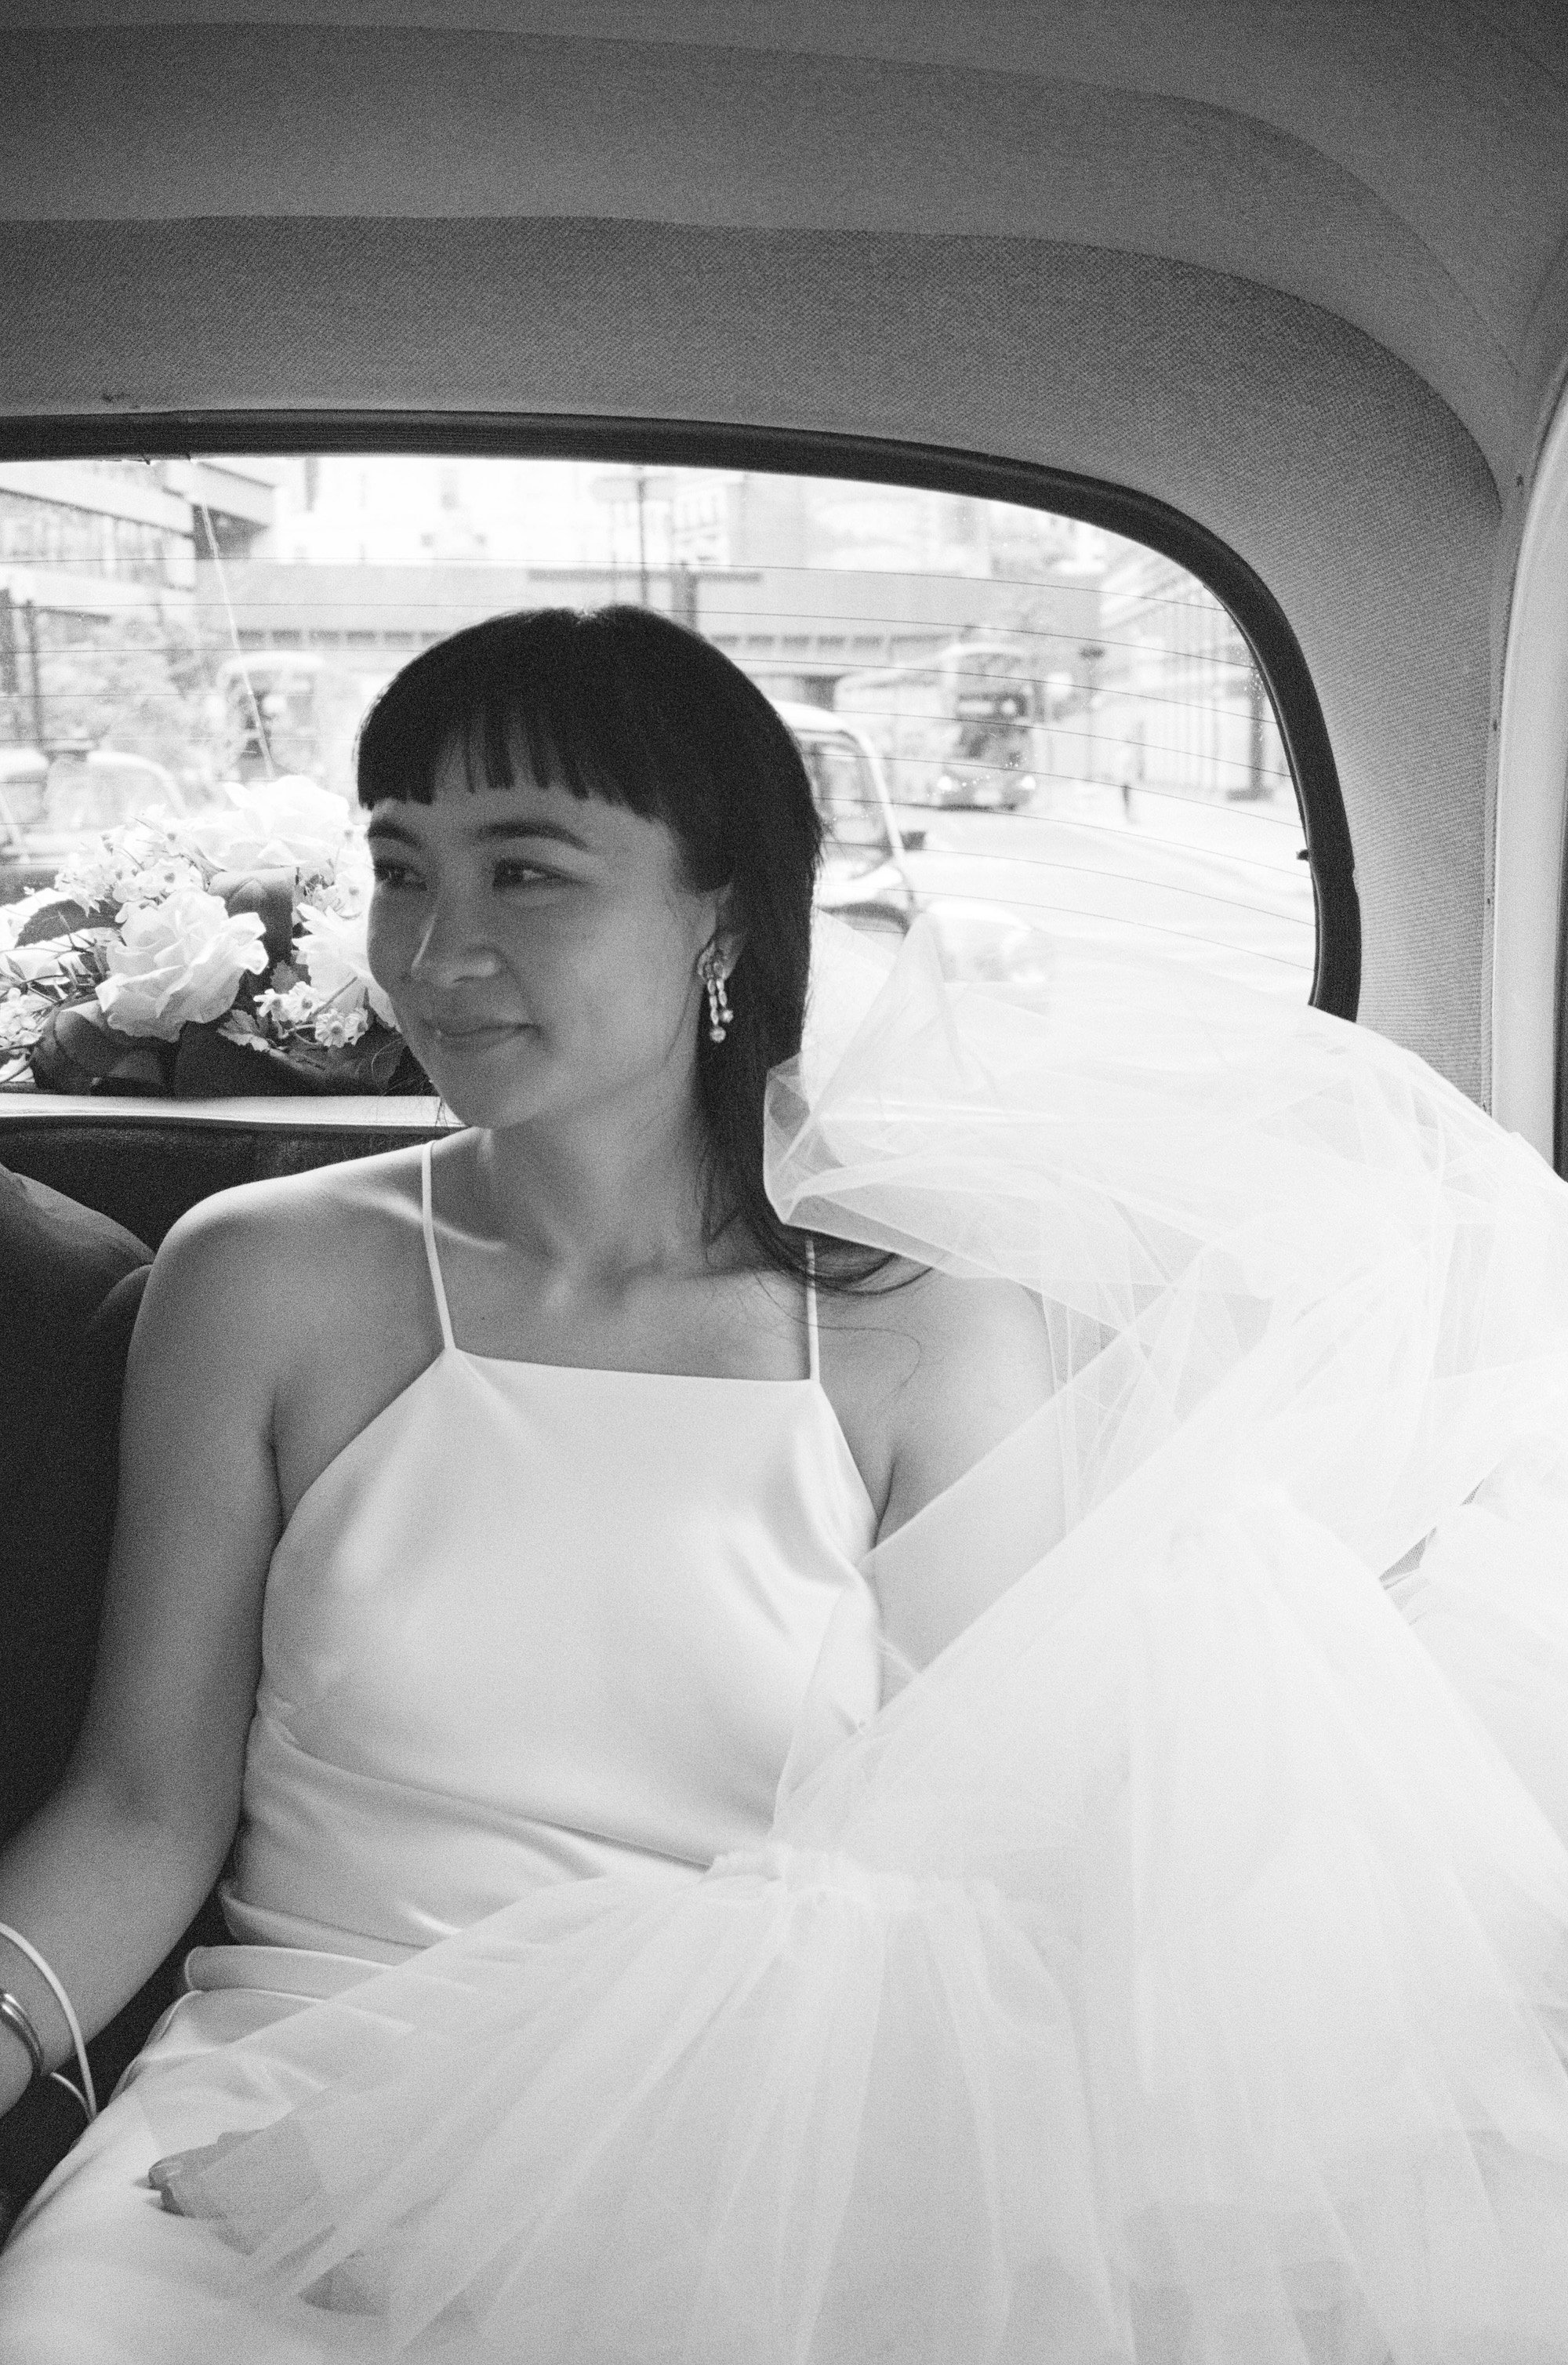 Beautiful bride Angela wore the Max wedding dress and Margaret veil by Halfpenny London